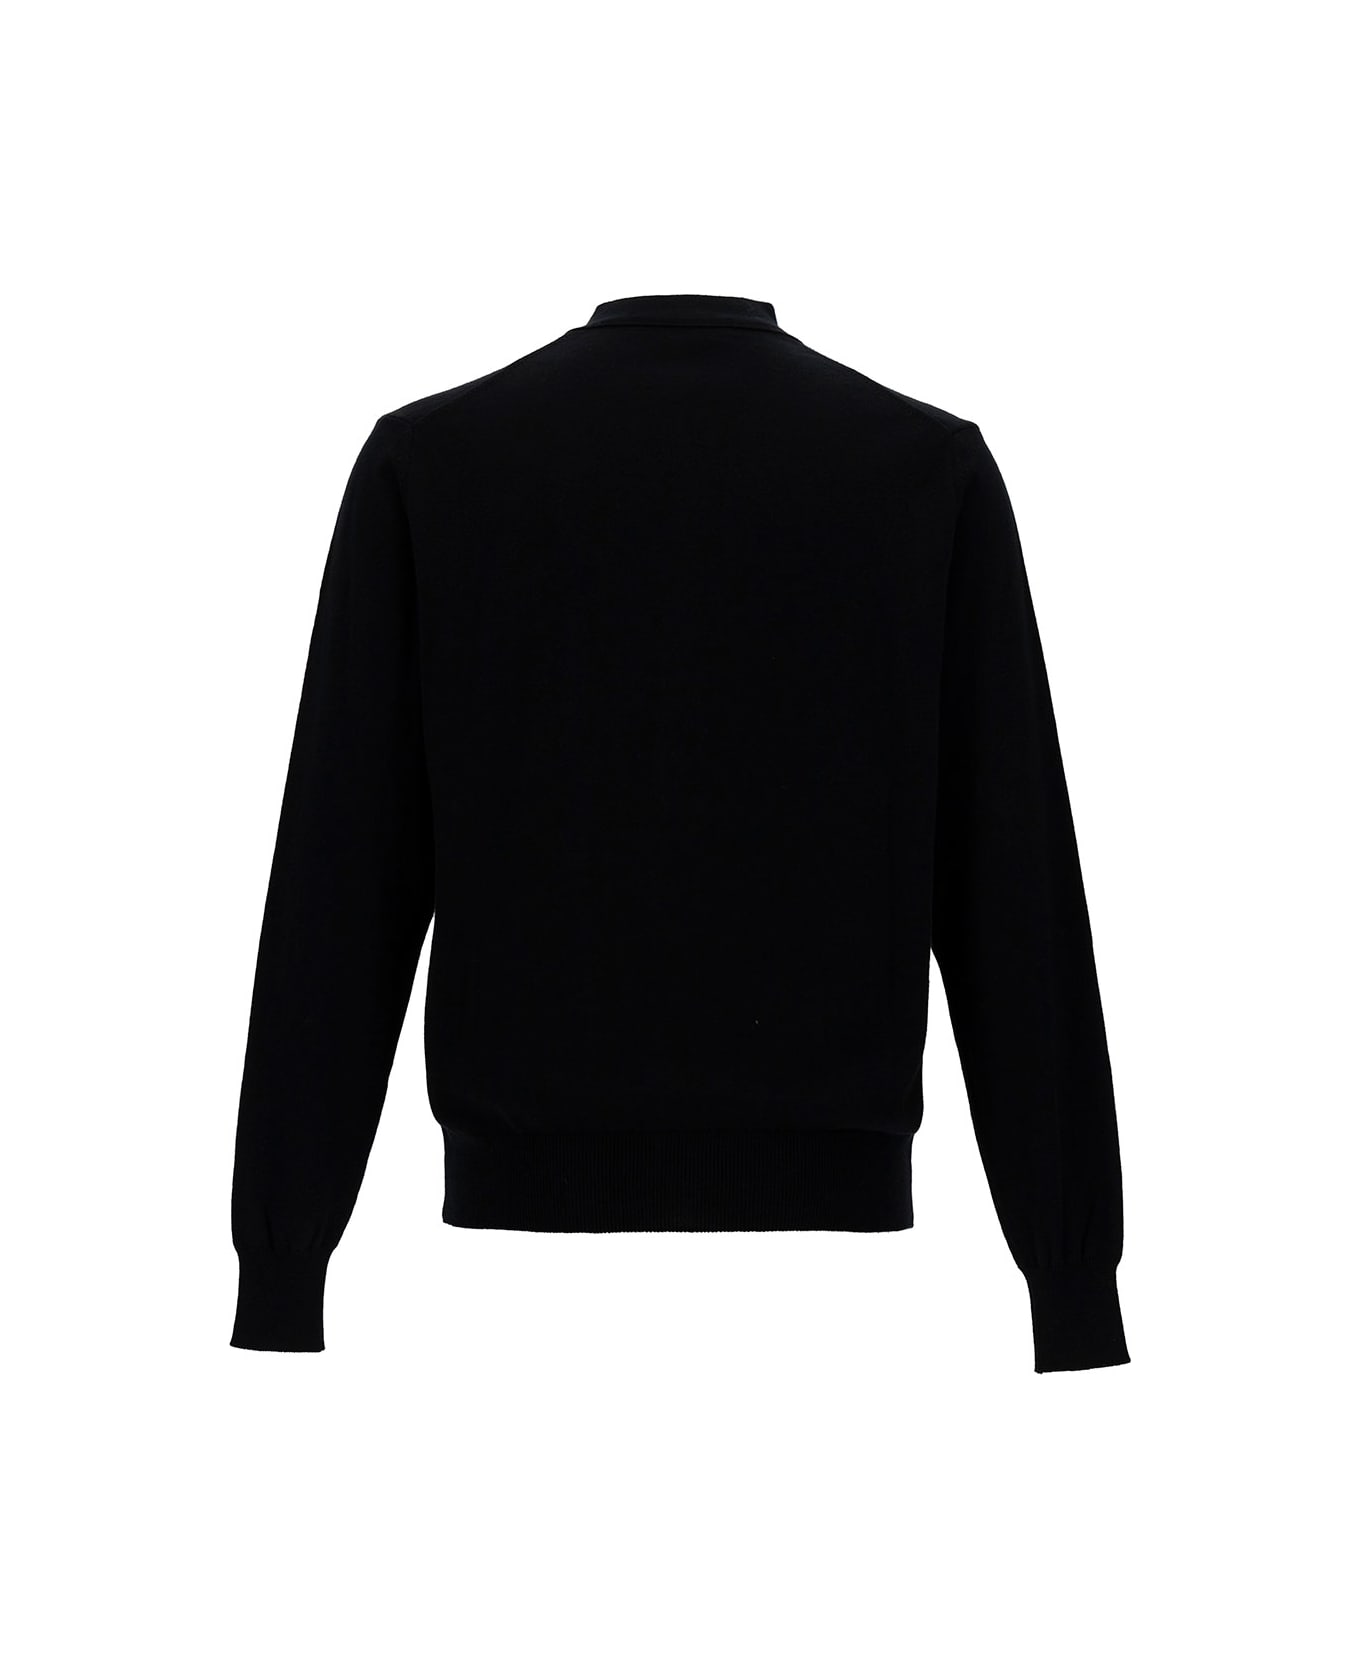 Vivienne Westwood Black V Neck Cardigan With Orb Embroidery In Cotton And Cashmere Man - Black